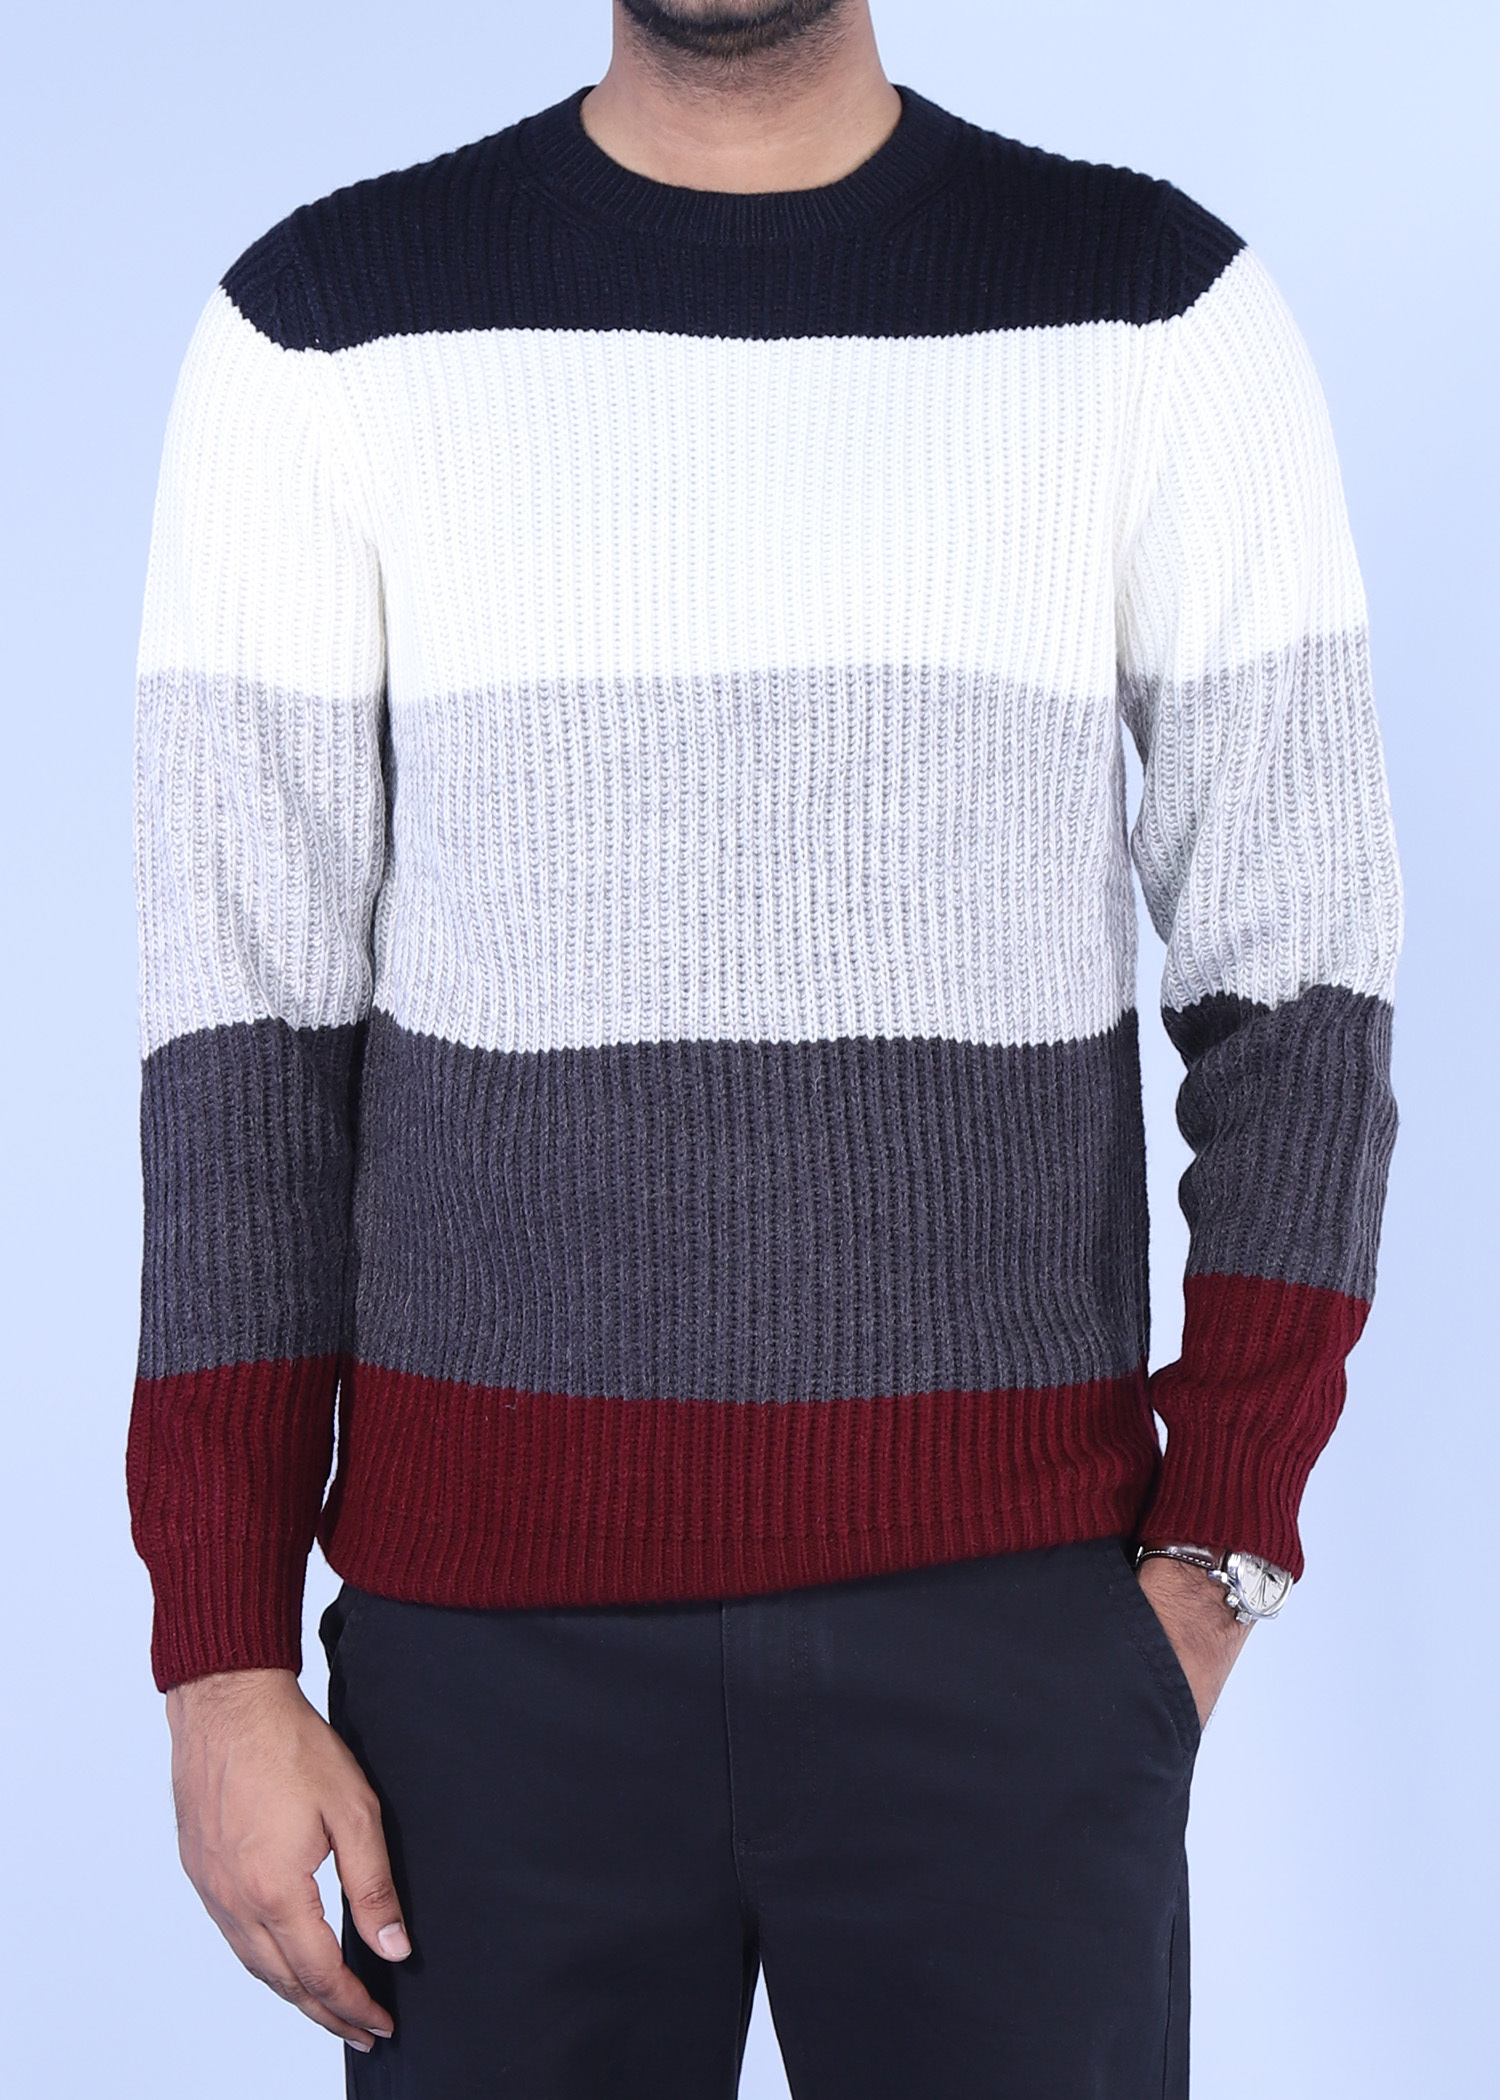 hillstar iii sweater navycombo color half front view